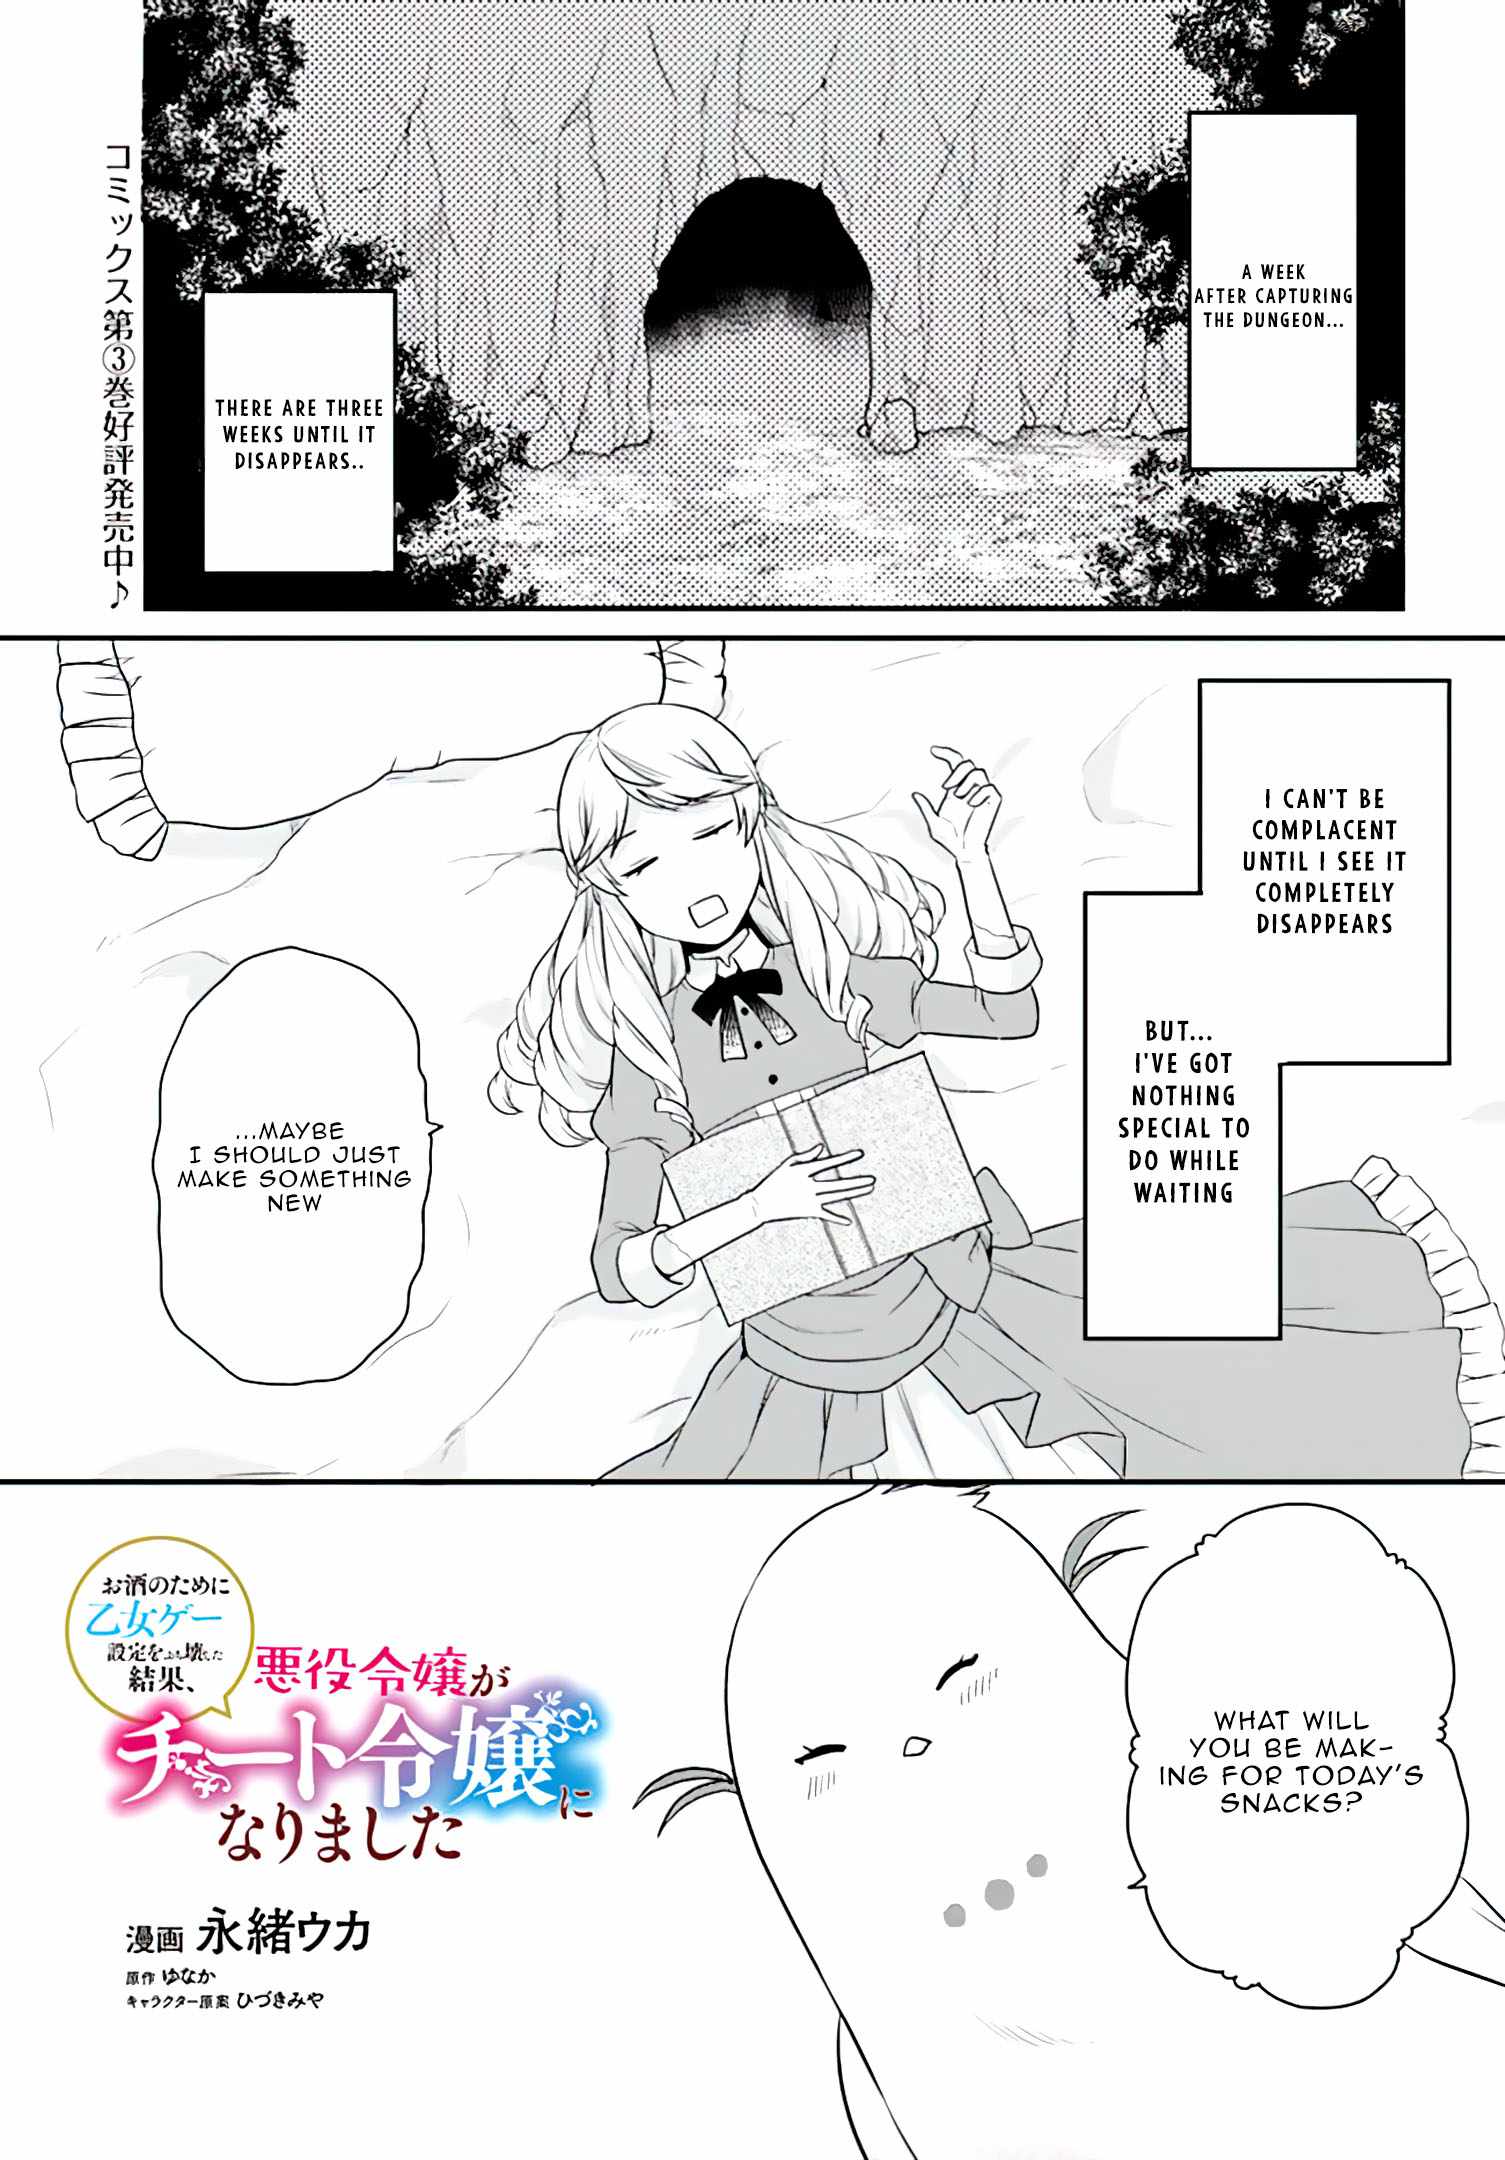 Because Of Her Love For Sake, The Otome Game Setting Was Broken And The Villainous Noblewoman Became The Noblewoman With Cheats - Page 2